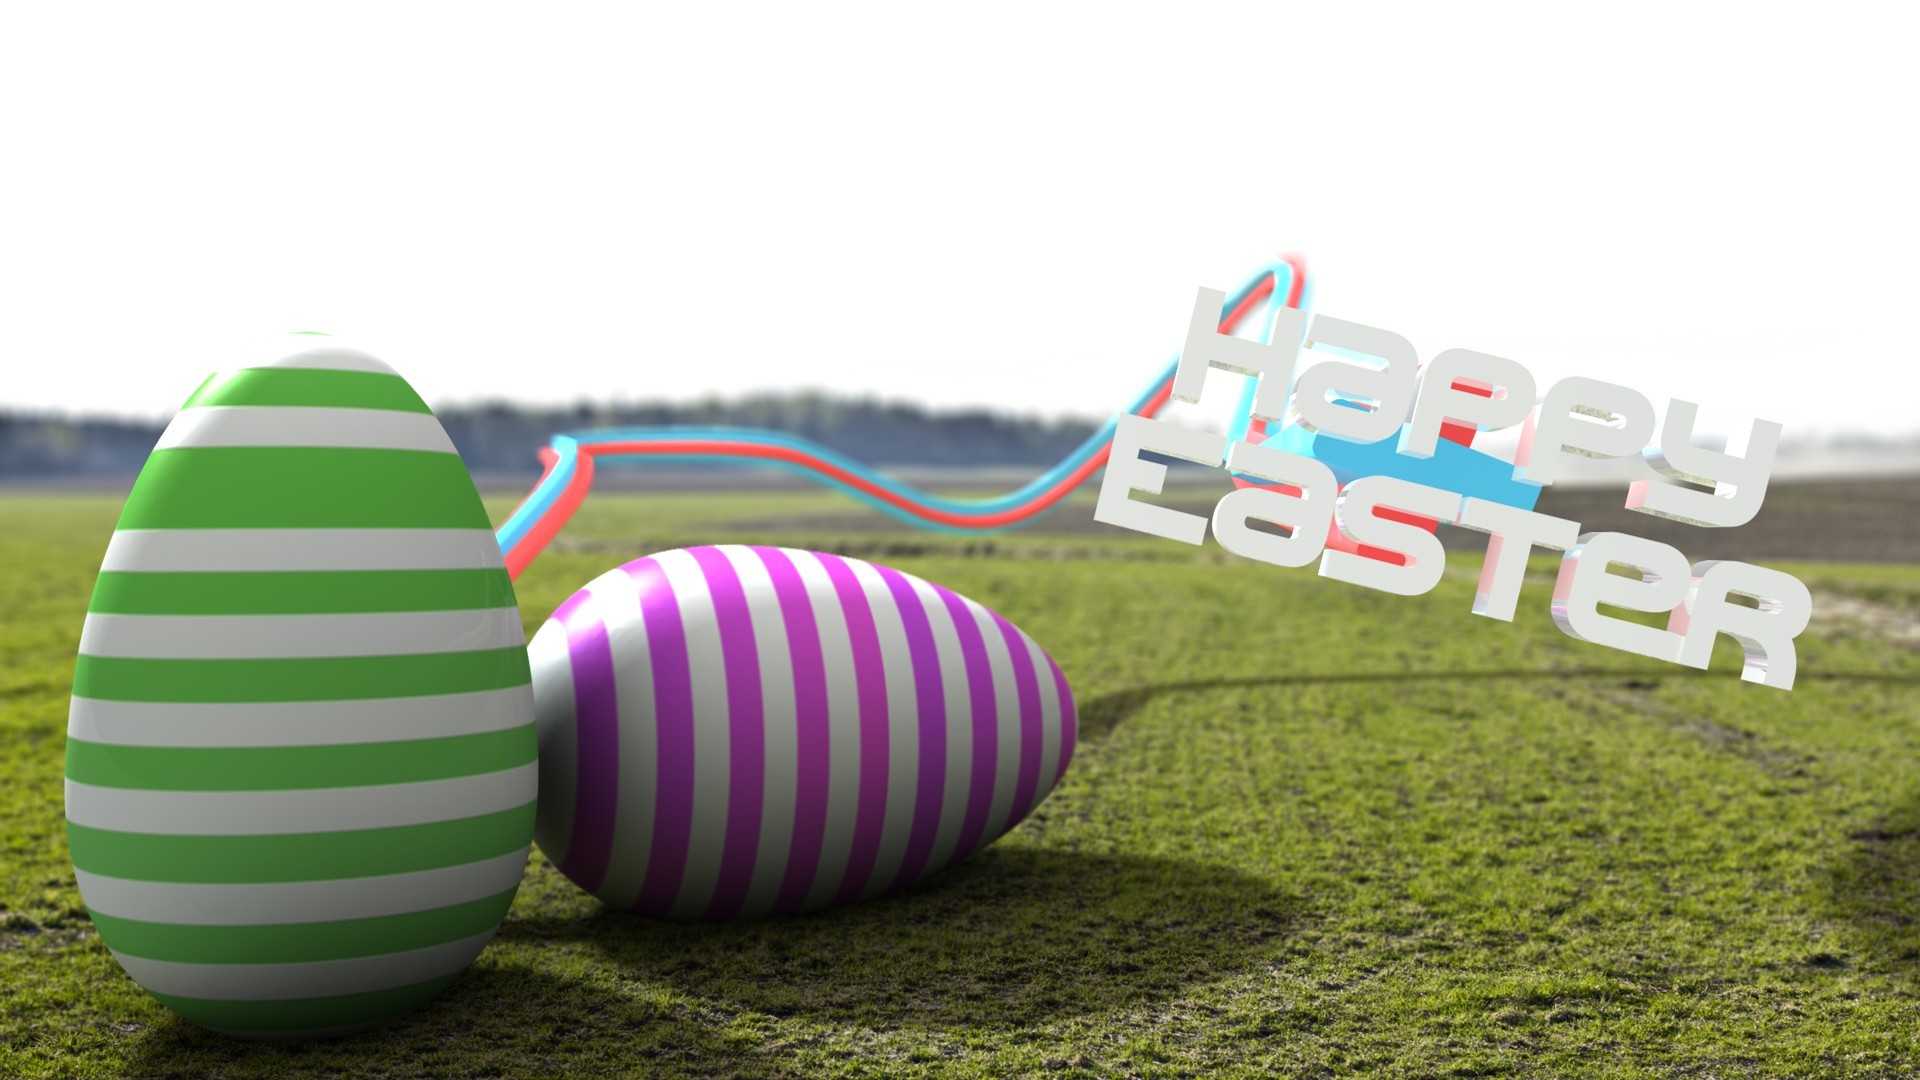 Easter Egg Free Awesome Image For Mobile